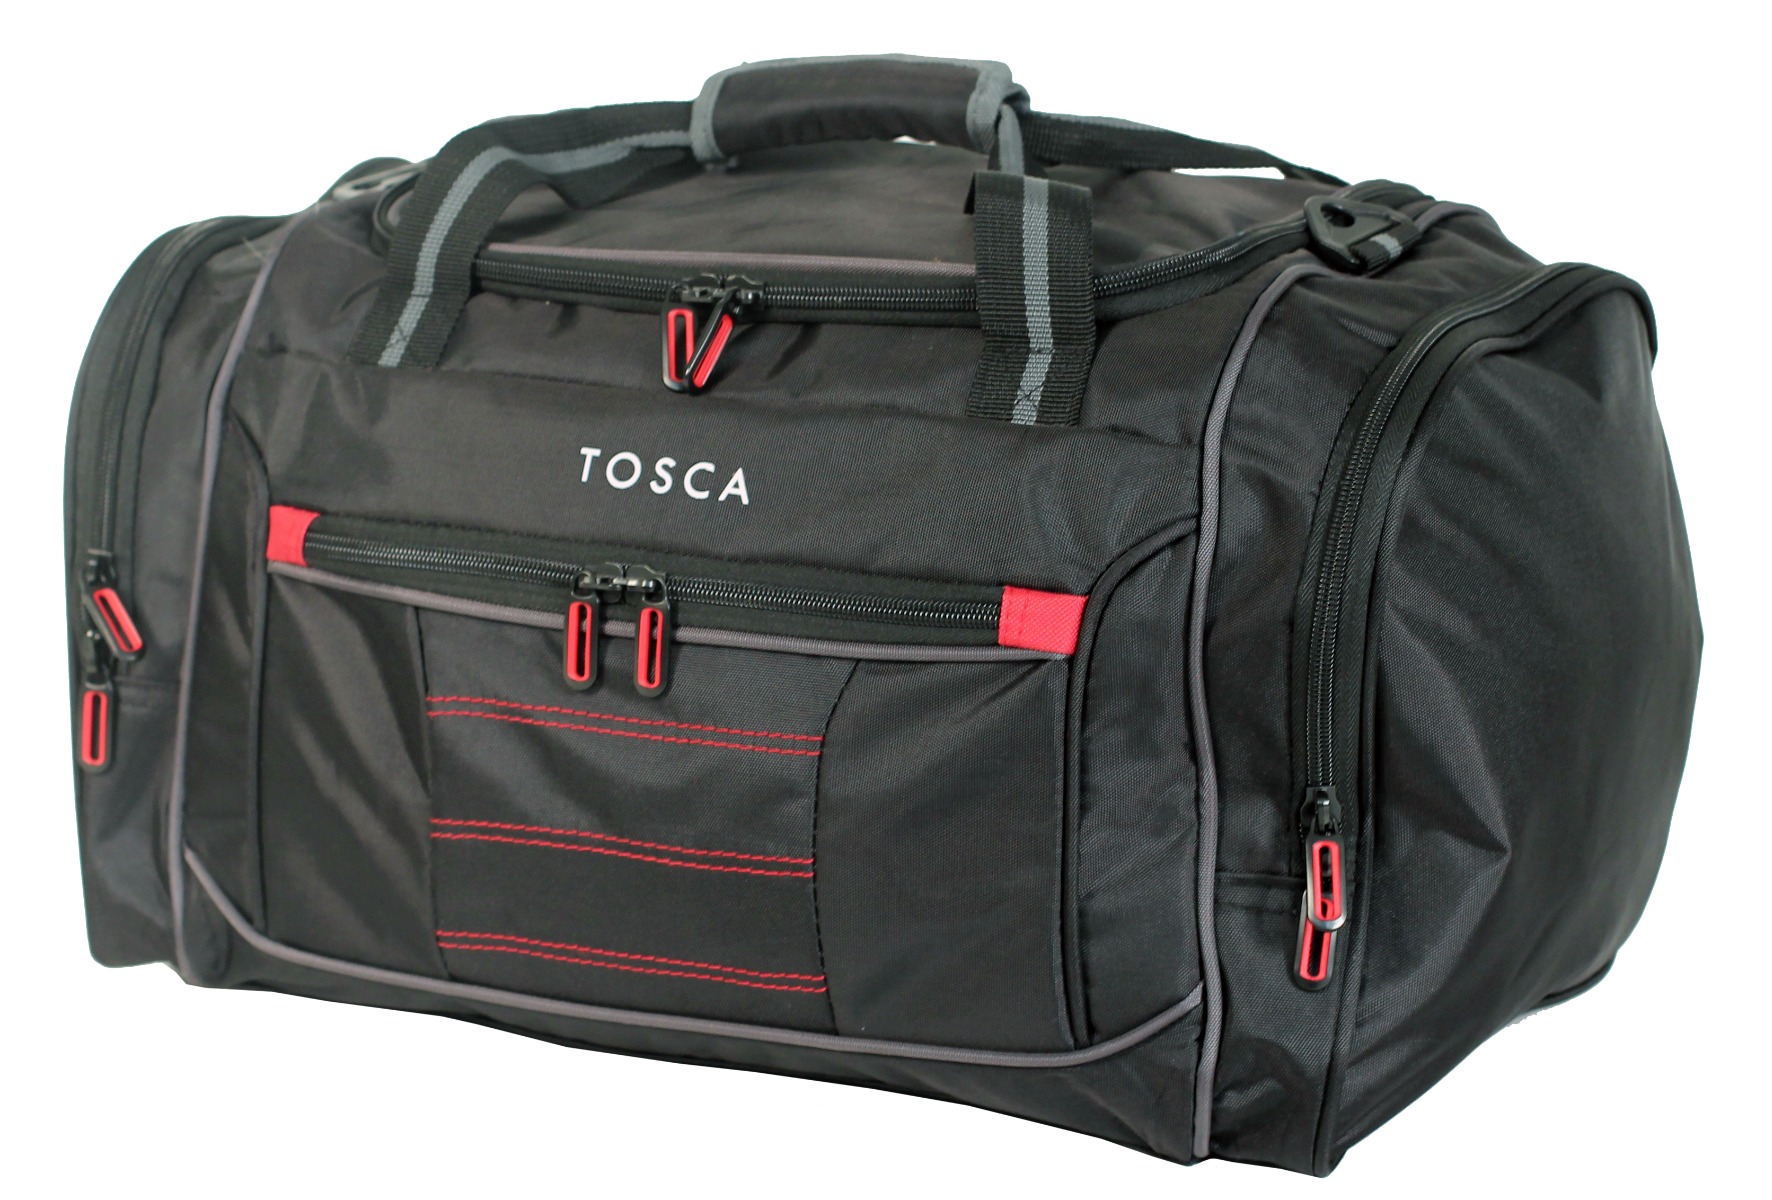 TOSCA SMALL DUFFLE BAG BLACK/RED front